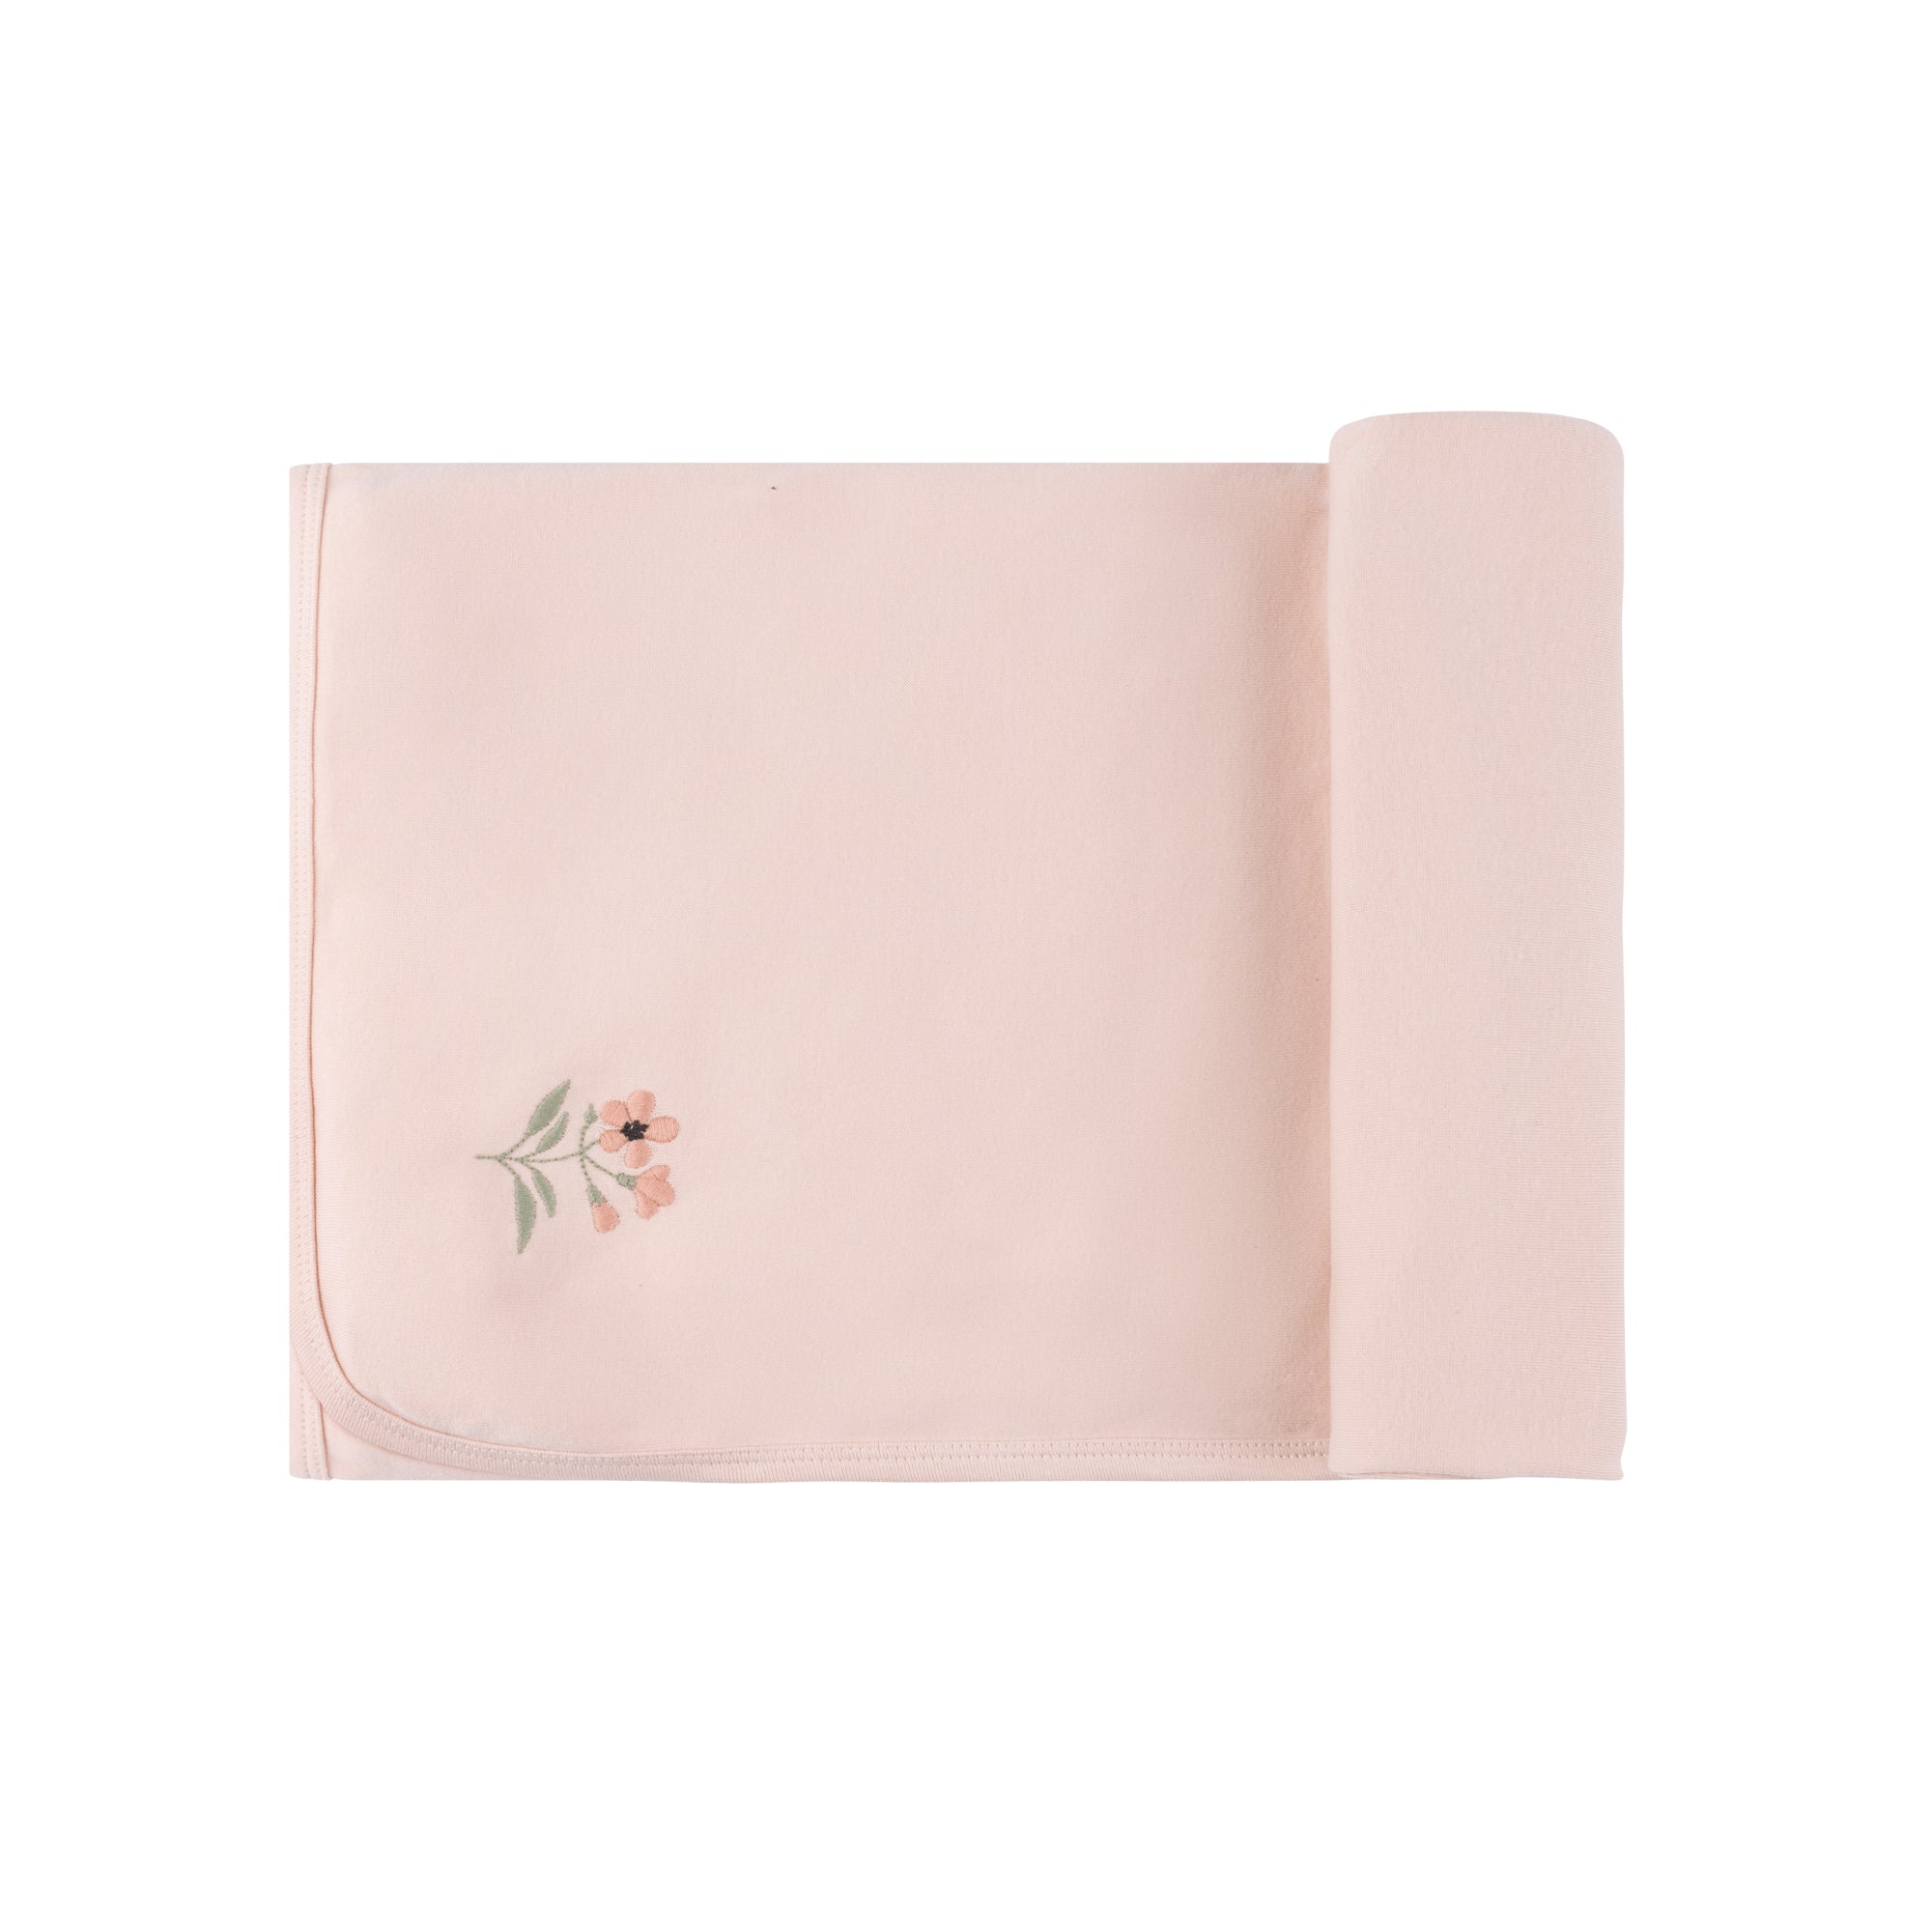 Cotton - Pocket Full of Flowers Collection - Blanket